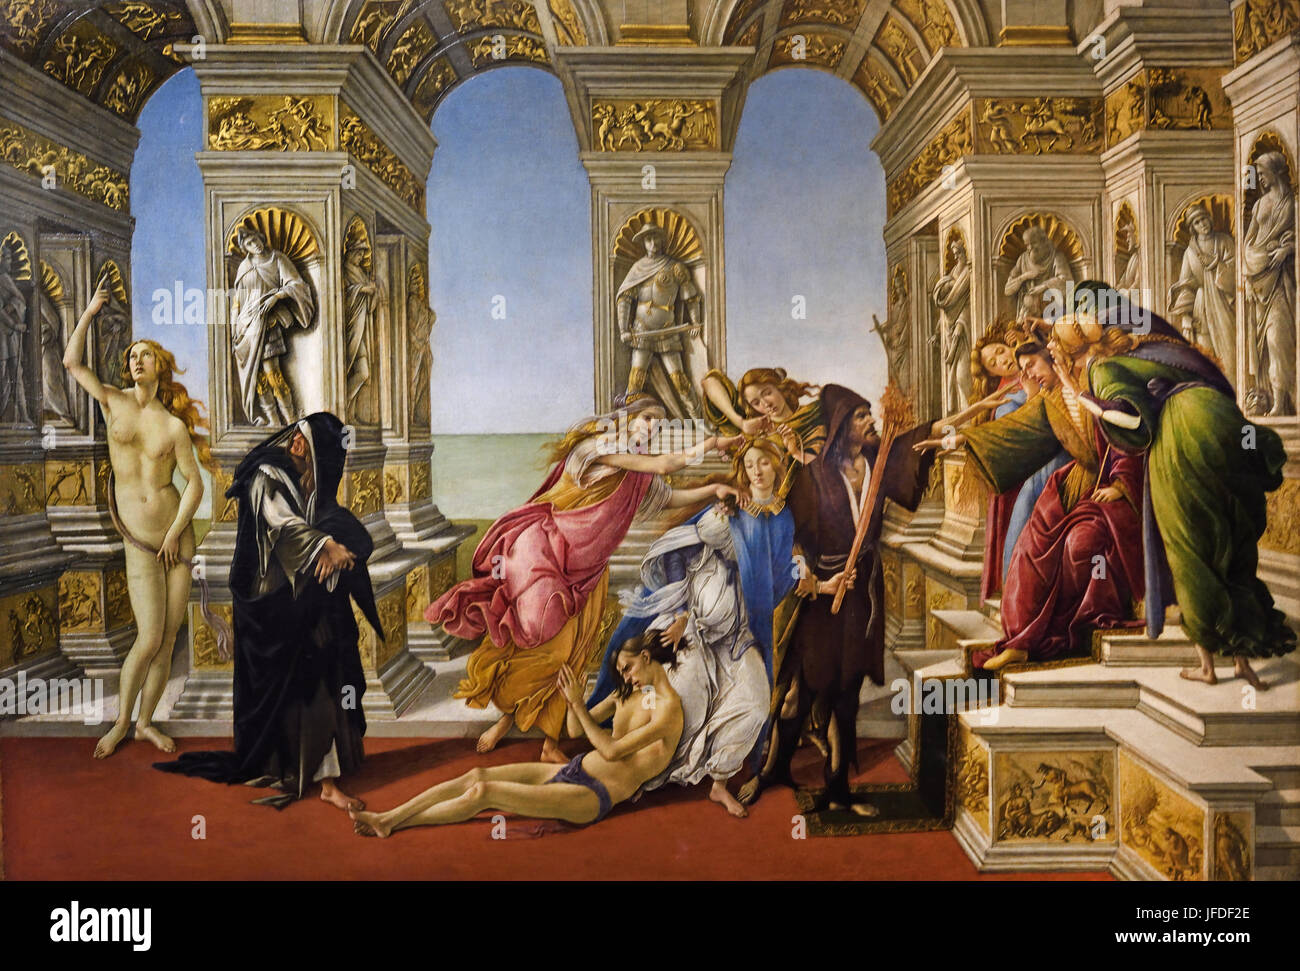 Calumny of Apelles 1495 Sandro Botticelli  ( Alessandro di Mariano Filipepi ) 1445-1510 Florence Italian painter Florentine school Early Renaissance. (Botticelli made this painting on the description of a painting by Apelles, a Greek painter of the Hellenistic Period. Apelles Stock Photo